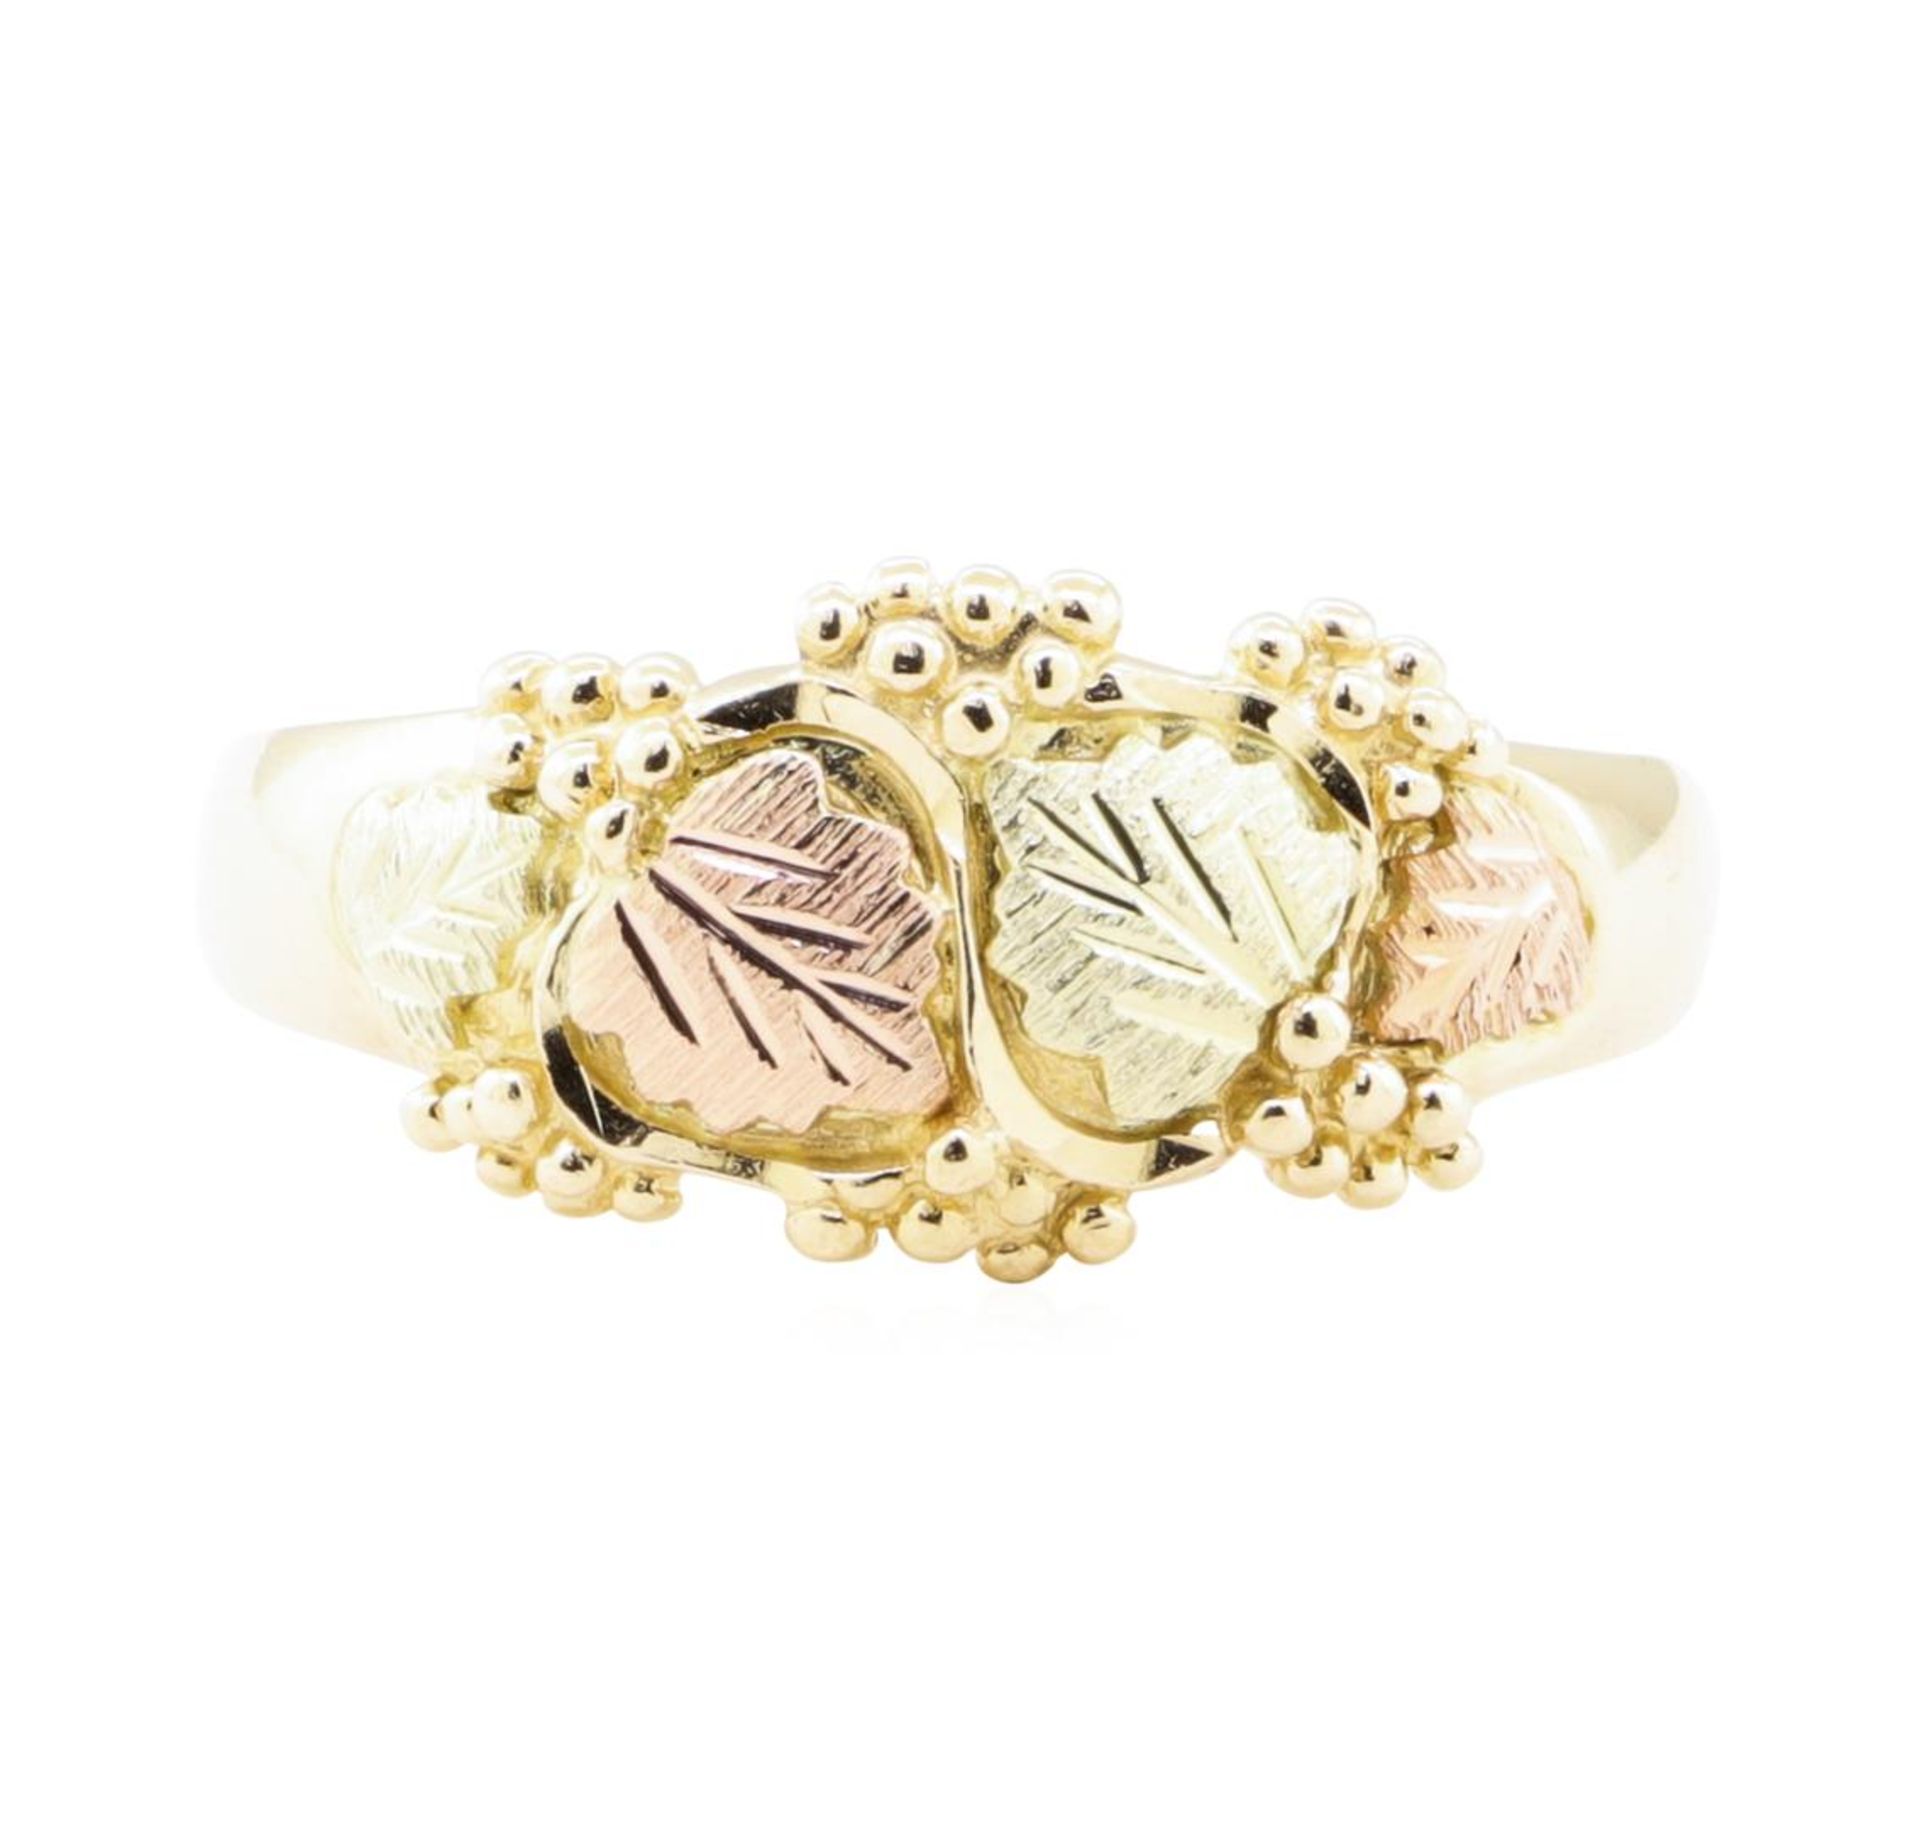 Black Hills Gold Motif Ring - 10KT Yellow, Pink, and Green Gold - Image 2 of 4